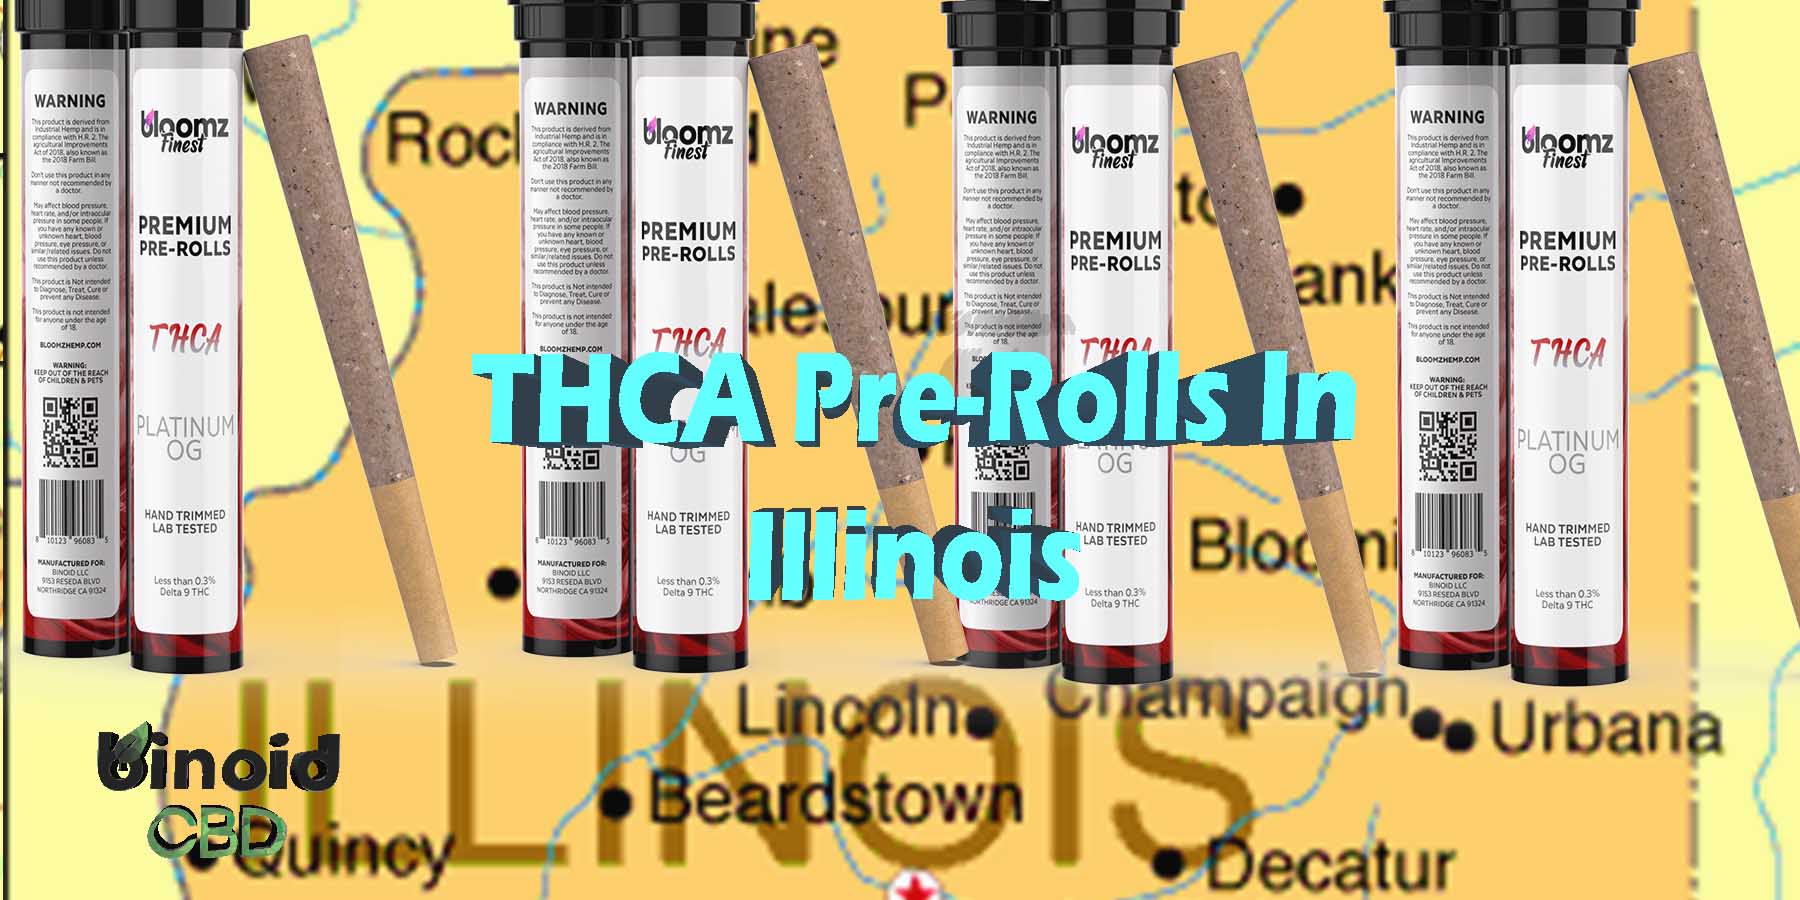 THCA Pre-Rolls In Illinois THCA Platinum OG Hemp Flower Indica Where To Get Near Me Best Place Lowest Price Coupon Discount Strongest Brand Bloomz